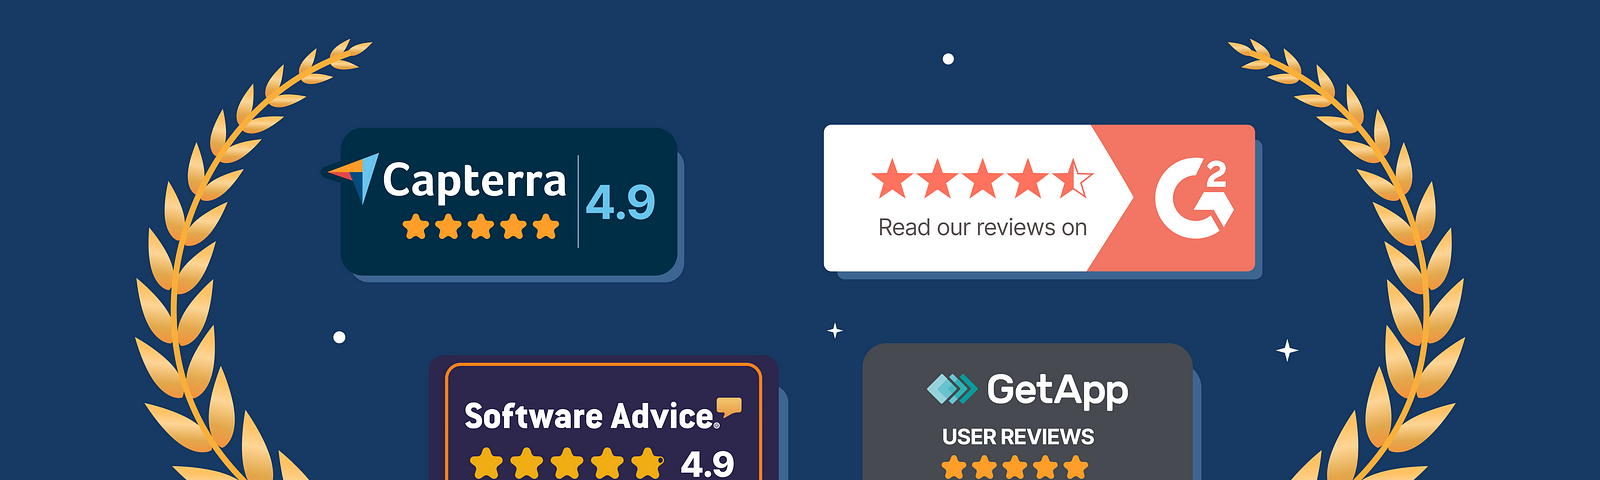 Bold BI Earns Top Ratings and Esteemed Badges on Leading Review Sites!